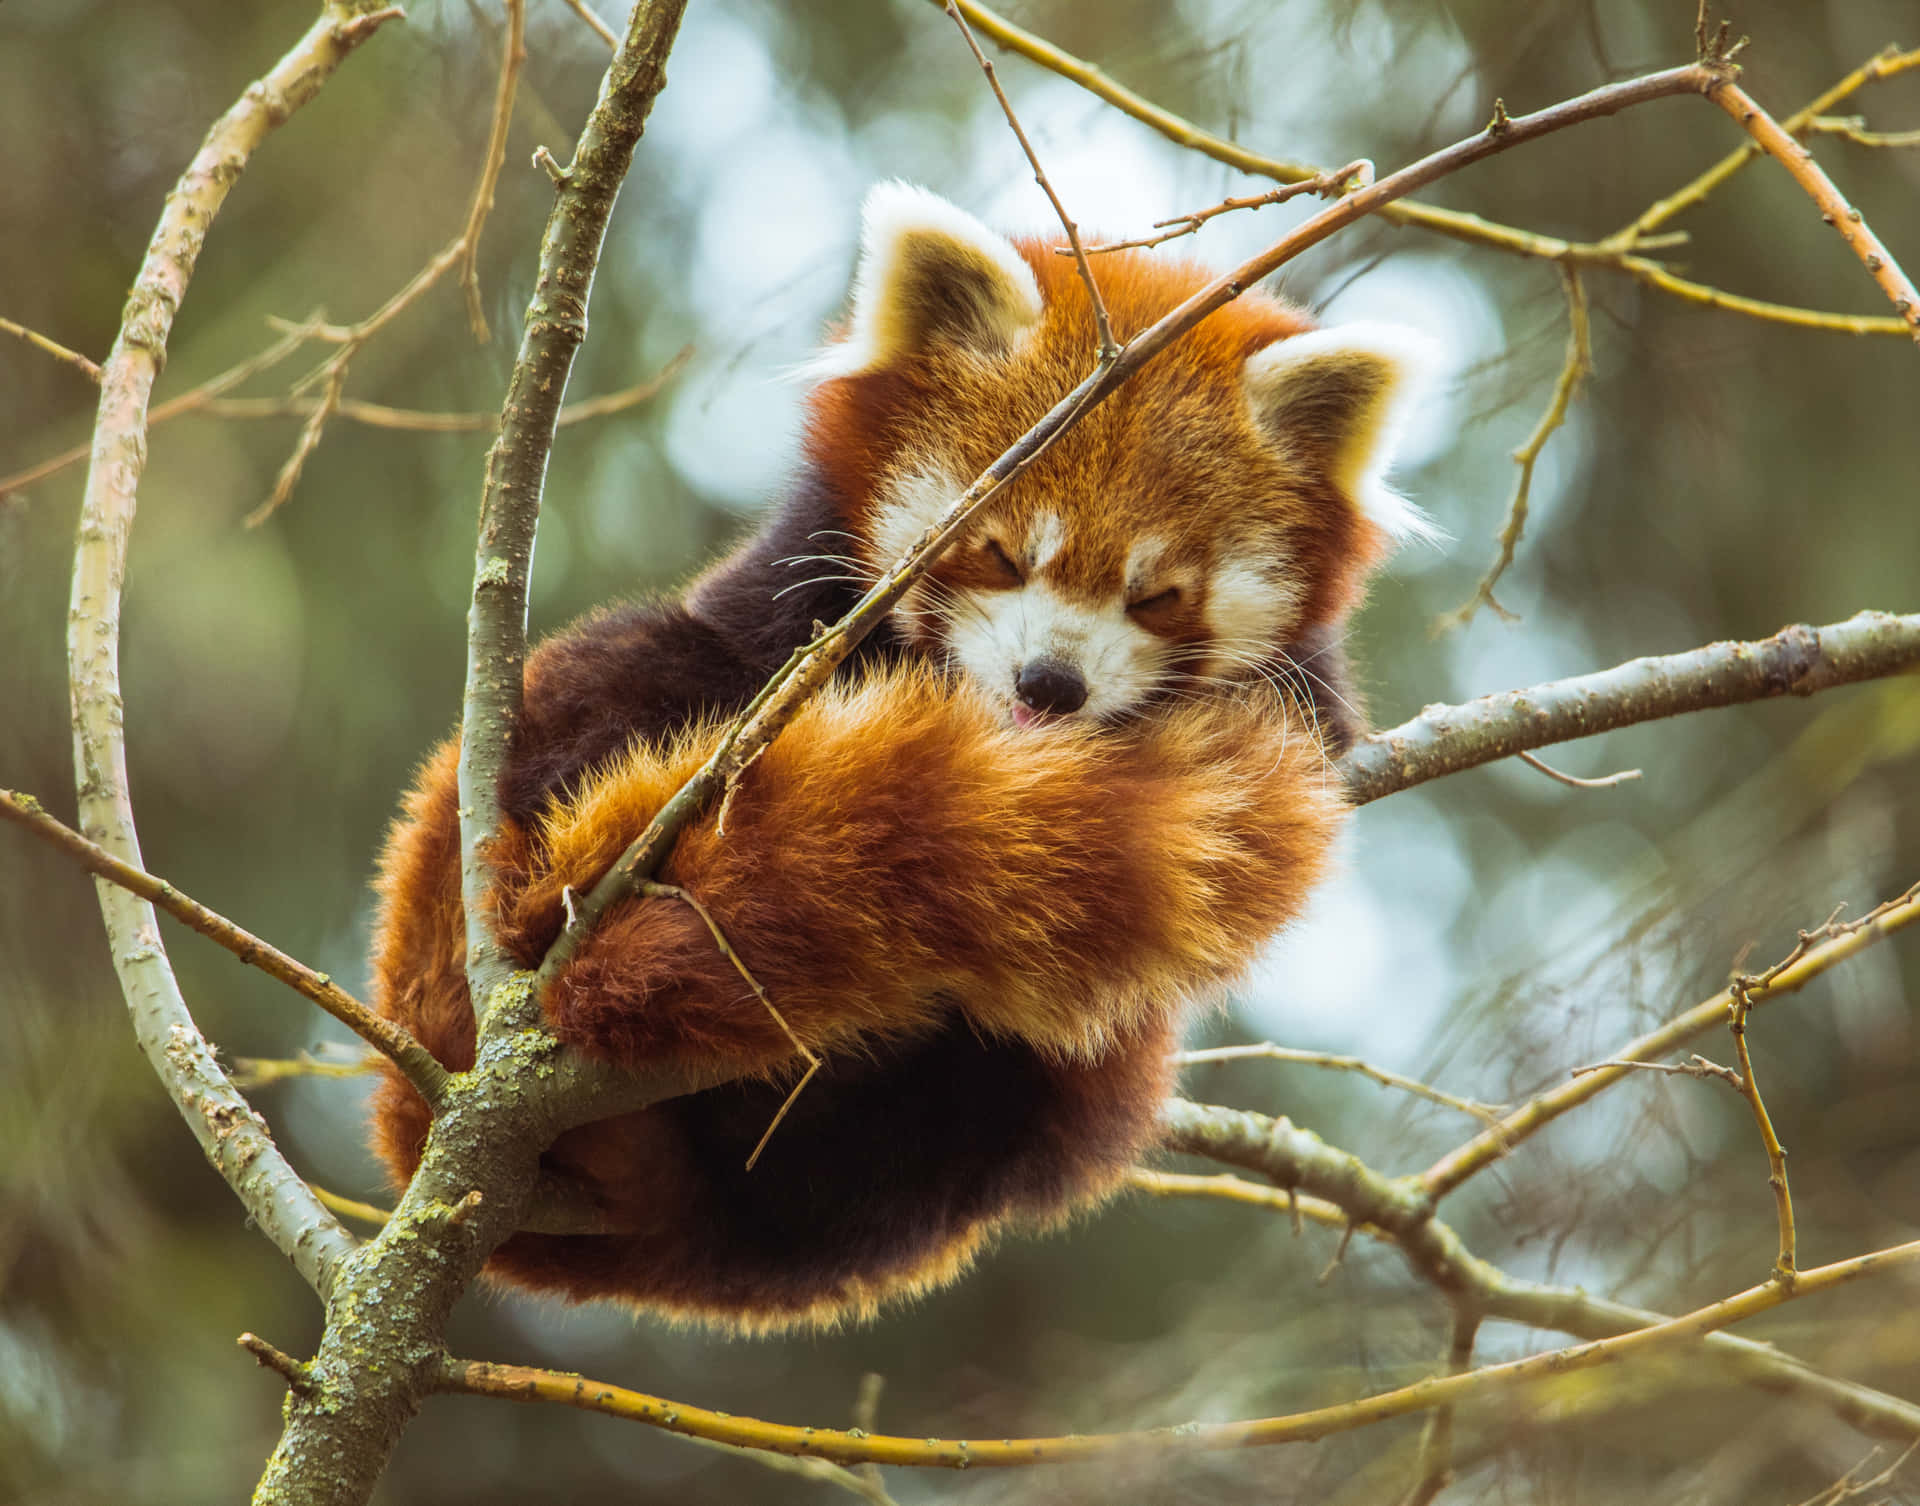 A Lovable Red Panda Enjoys the Fullness of Nature